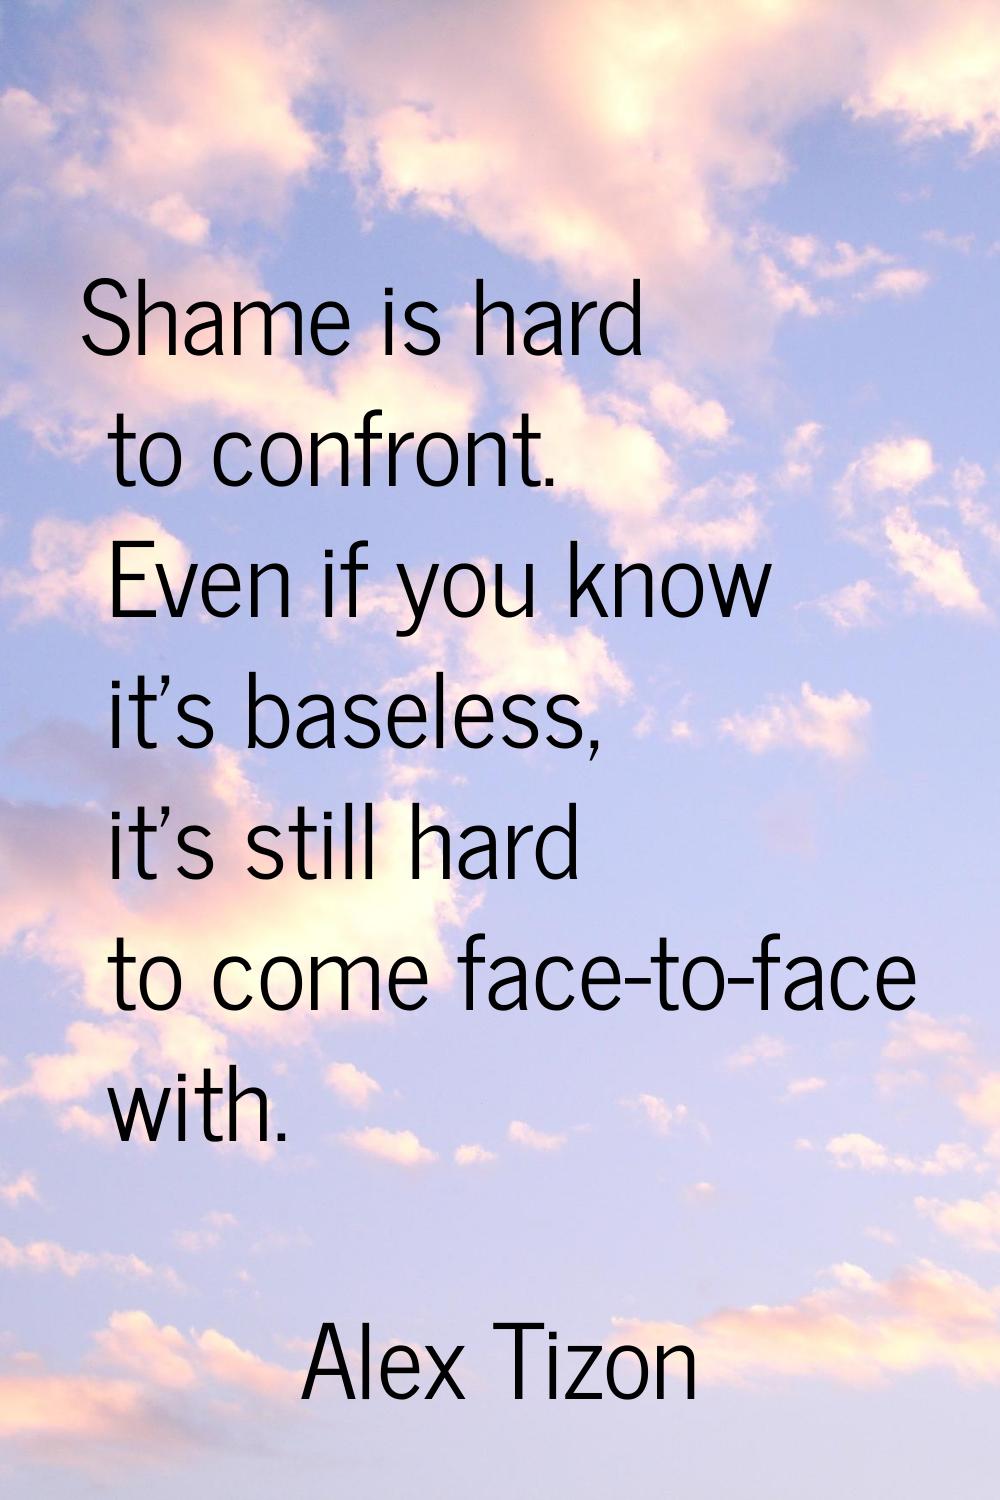 Shame is hard to confront. Even if you know it's baseless, it's still hard to come face-to-face wit